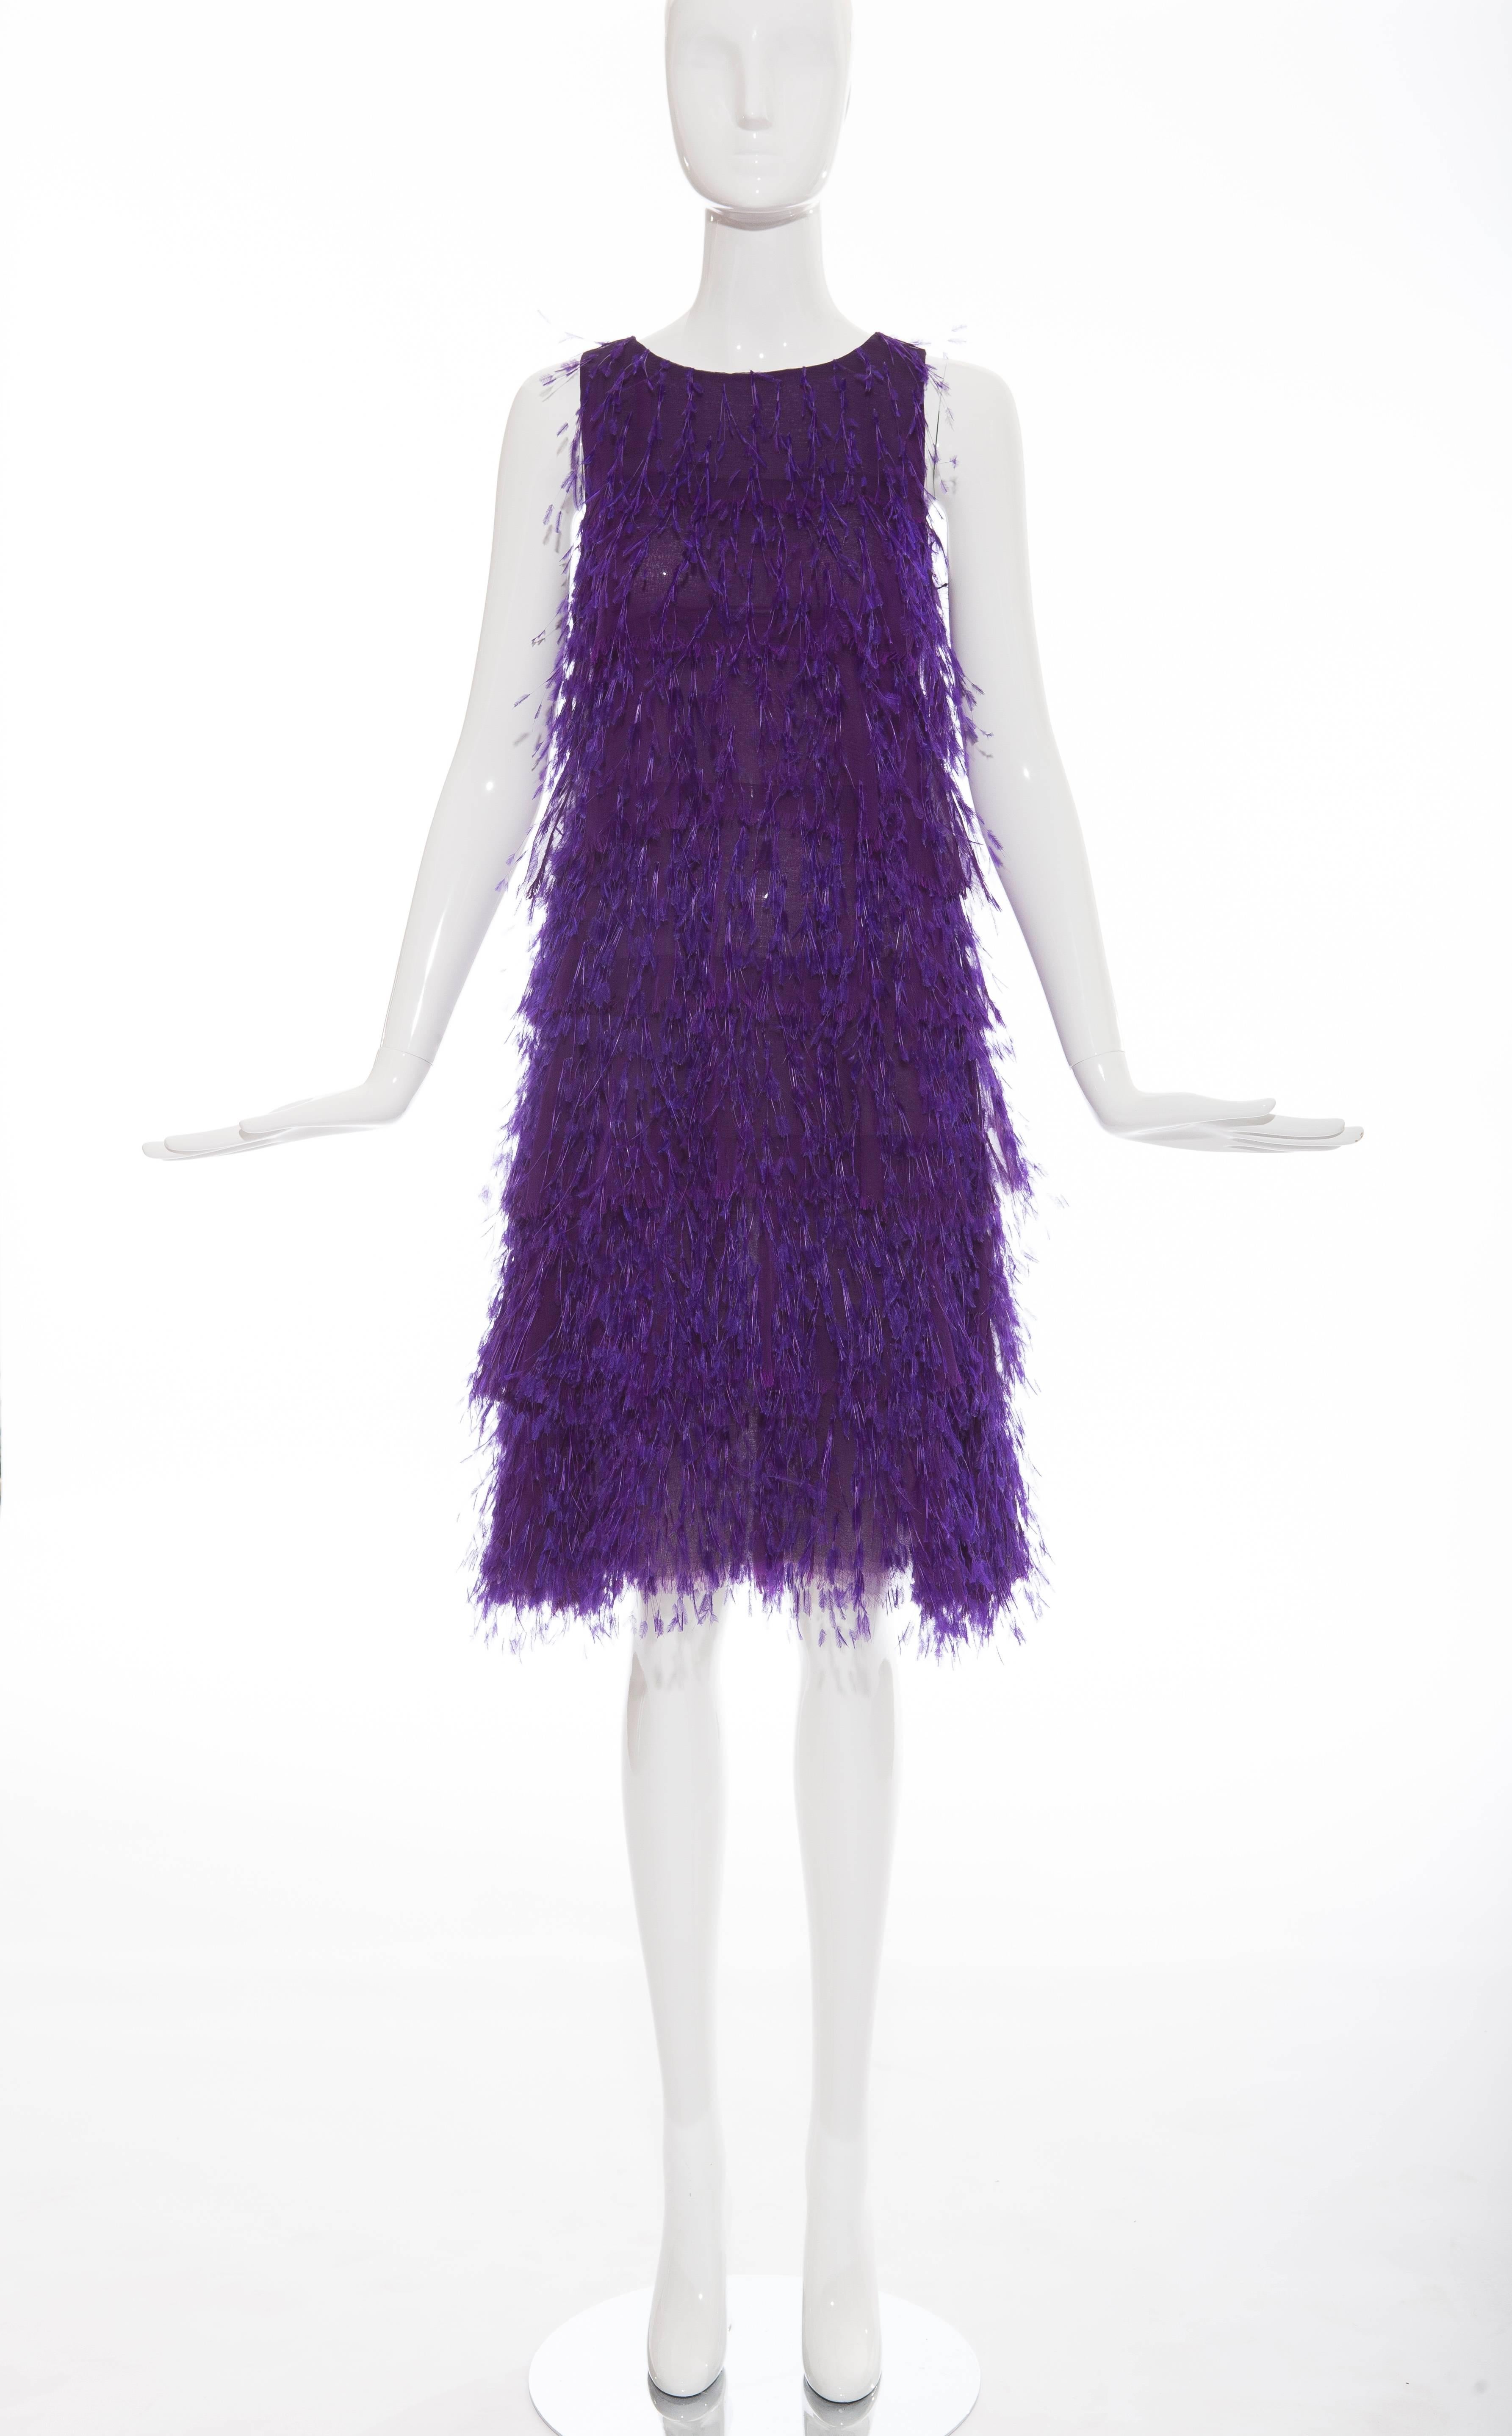 Chado Ralph Rucci, Fall 2013, sleeveless silk shift dress with crew neck, feather detail throughout, concealed back zip and fully lined in silk chiffon.

Bust 32”, Waist 31”, Hip 40”, Length 40.5”
Fabric Content: 100% Silk